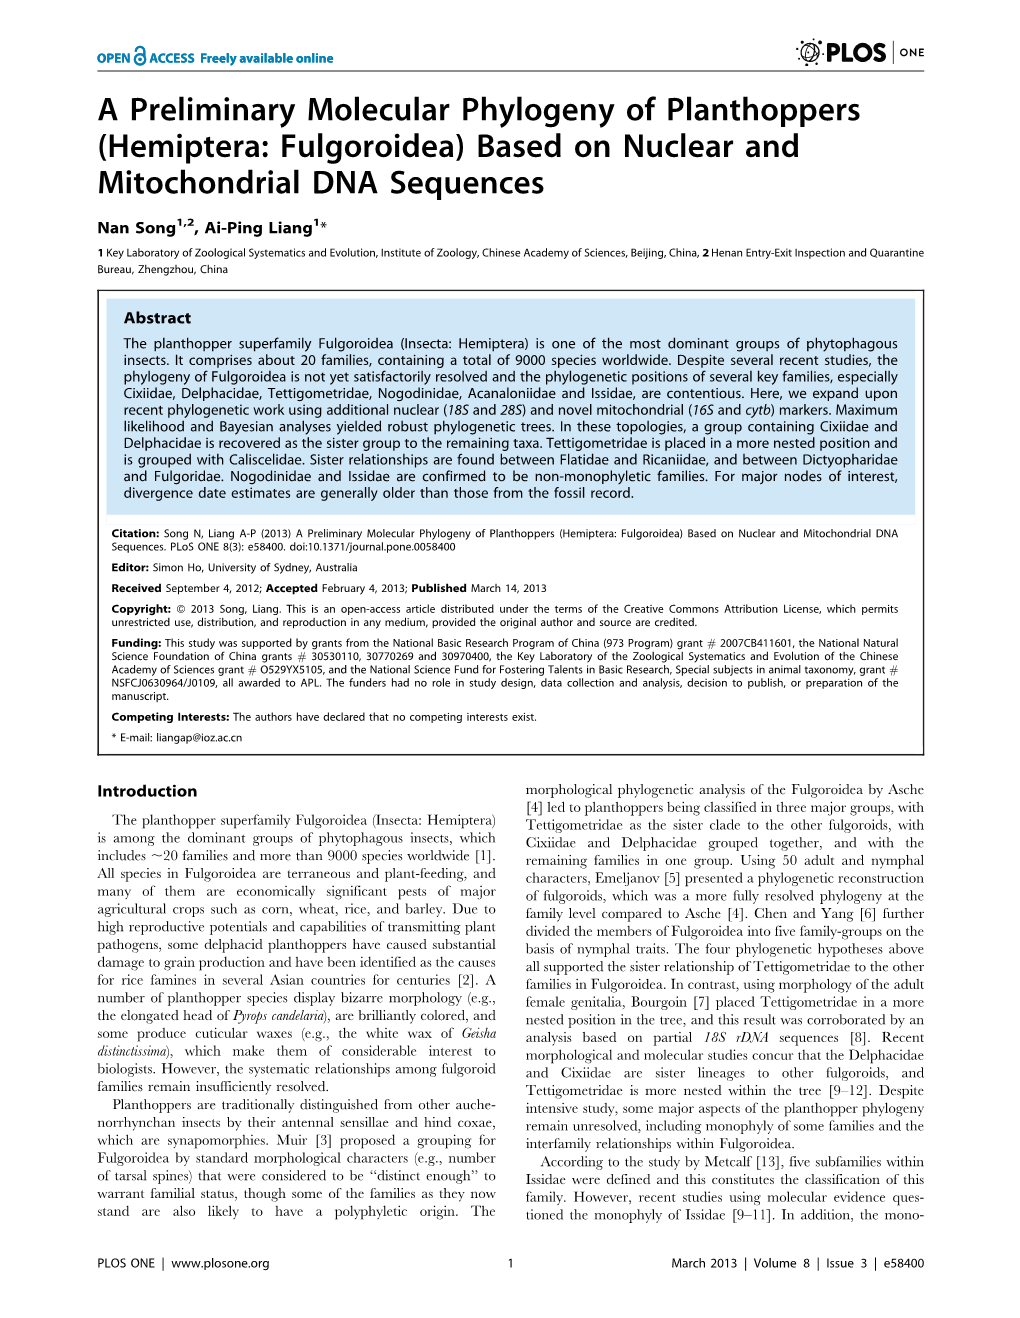 A Preliminary Molecular Phylogeny of Planthoppers (Hemiptera: Fulgoroidea) Based on Nuclear and Mitochondrial DNA Sequences